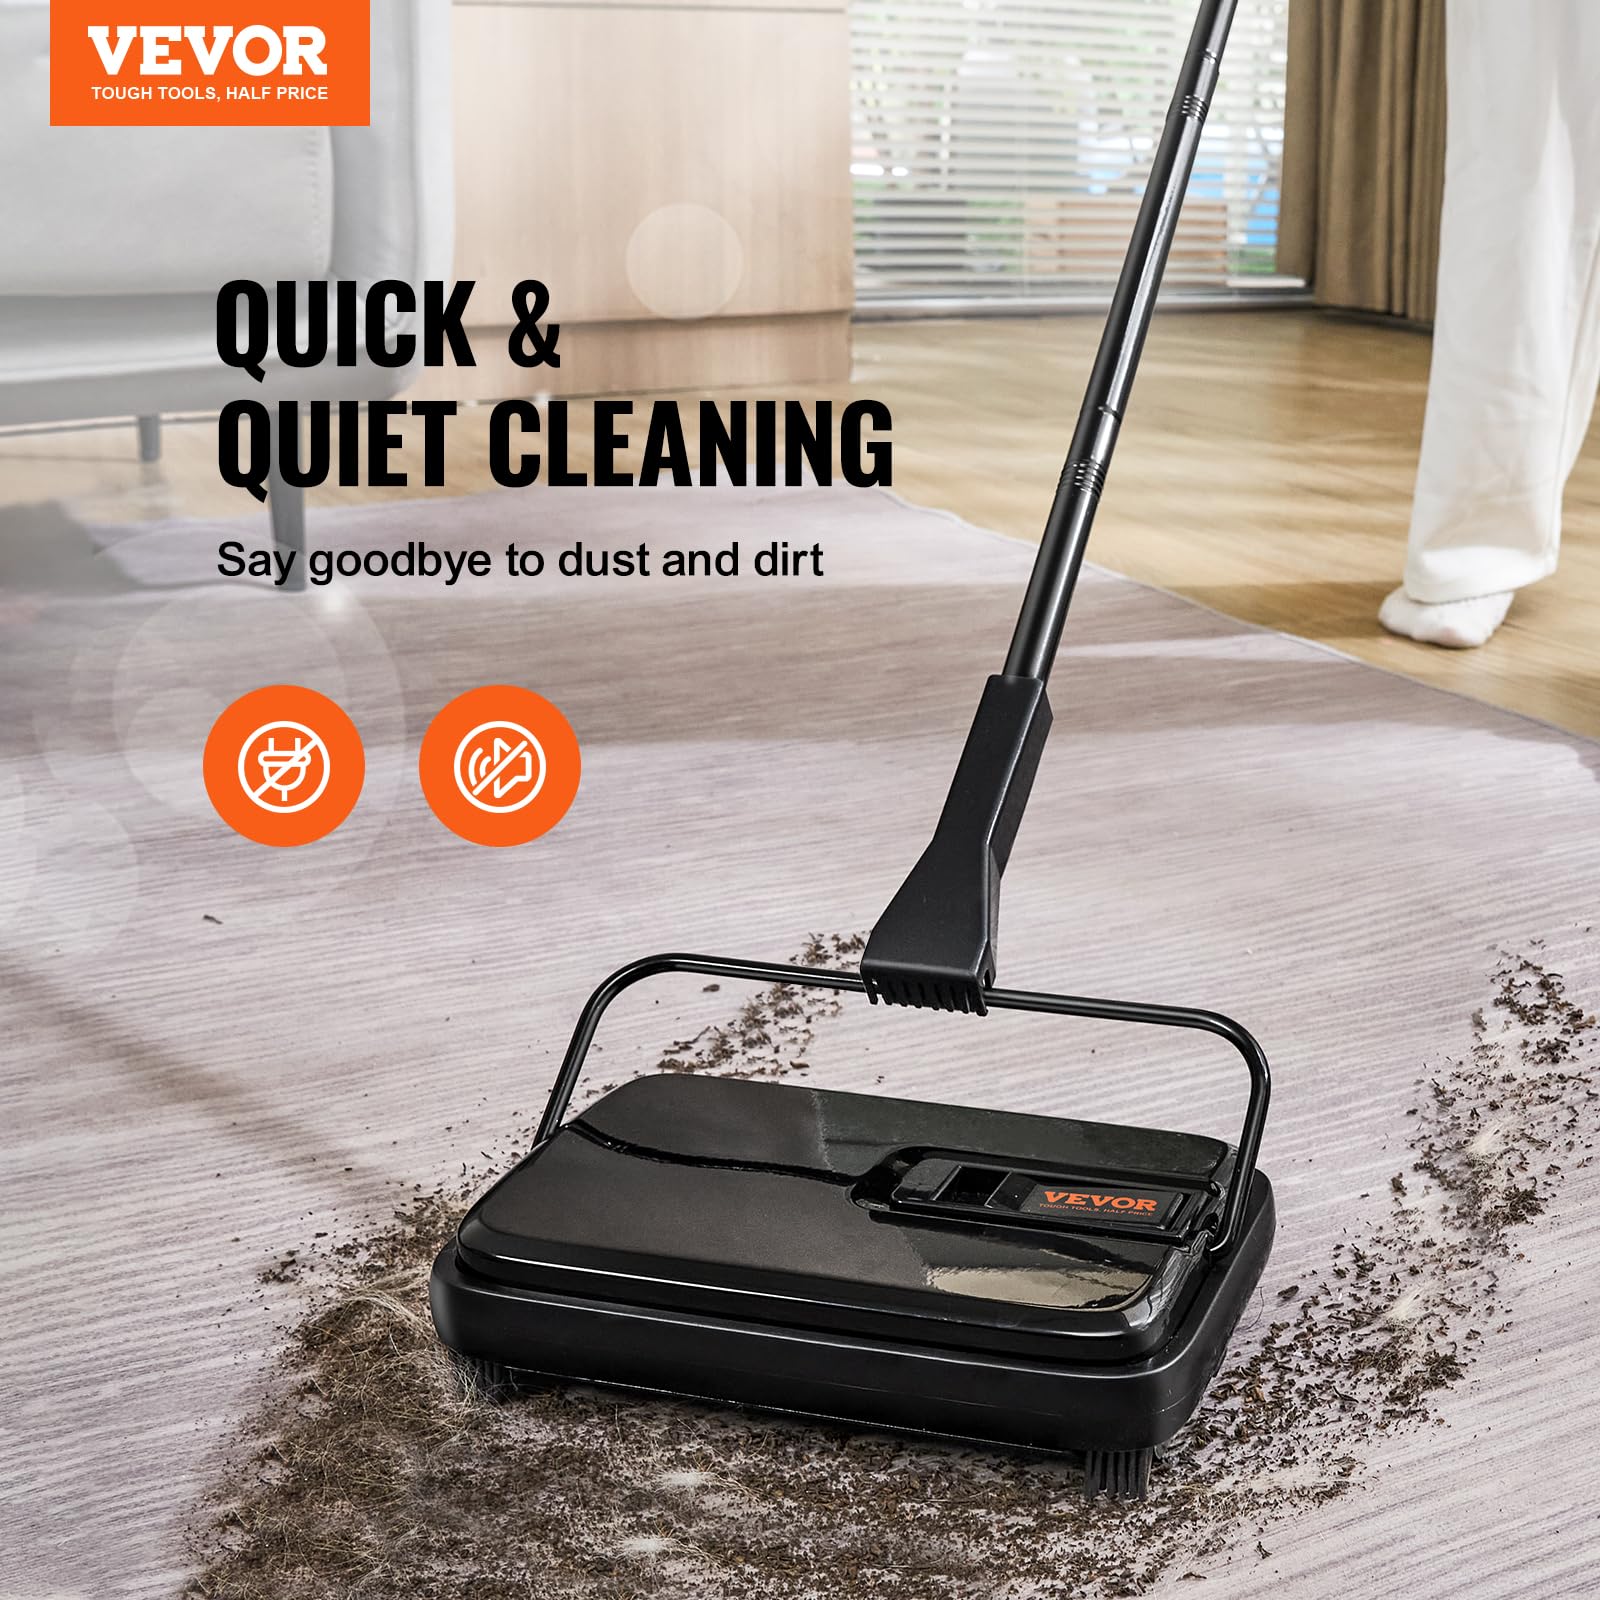 VEVOR Carpet, 7.87 in Sweeping Paths Sweeper Manual Non Electric, 300 ml Dustbin Capacity with Comb for Home Office Rugs Hardwood Surfaces Wood Floors Laminate, Cleans Dust Pet Hair, Black